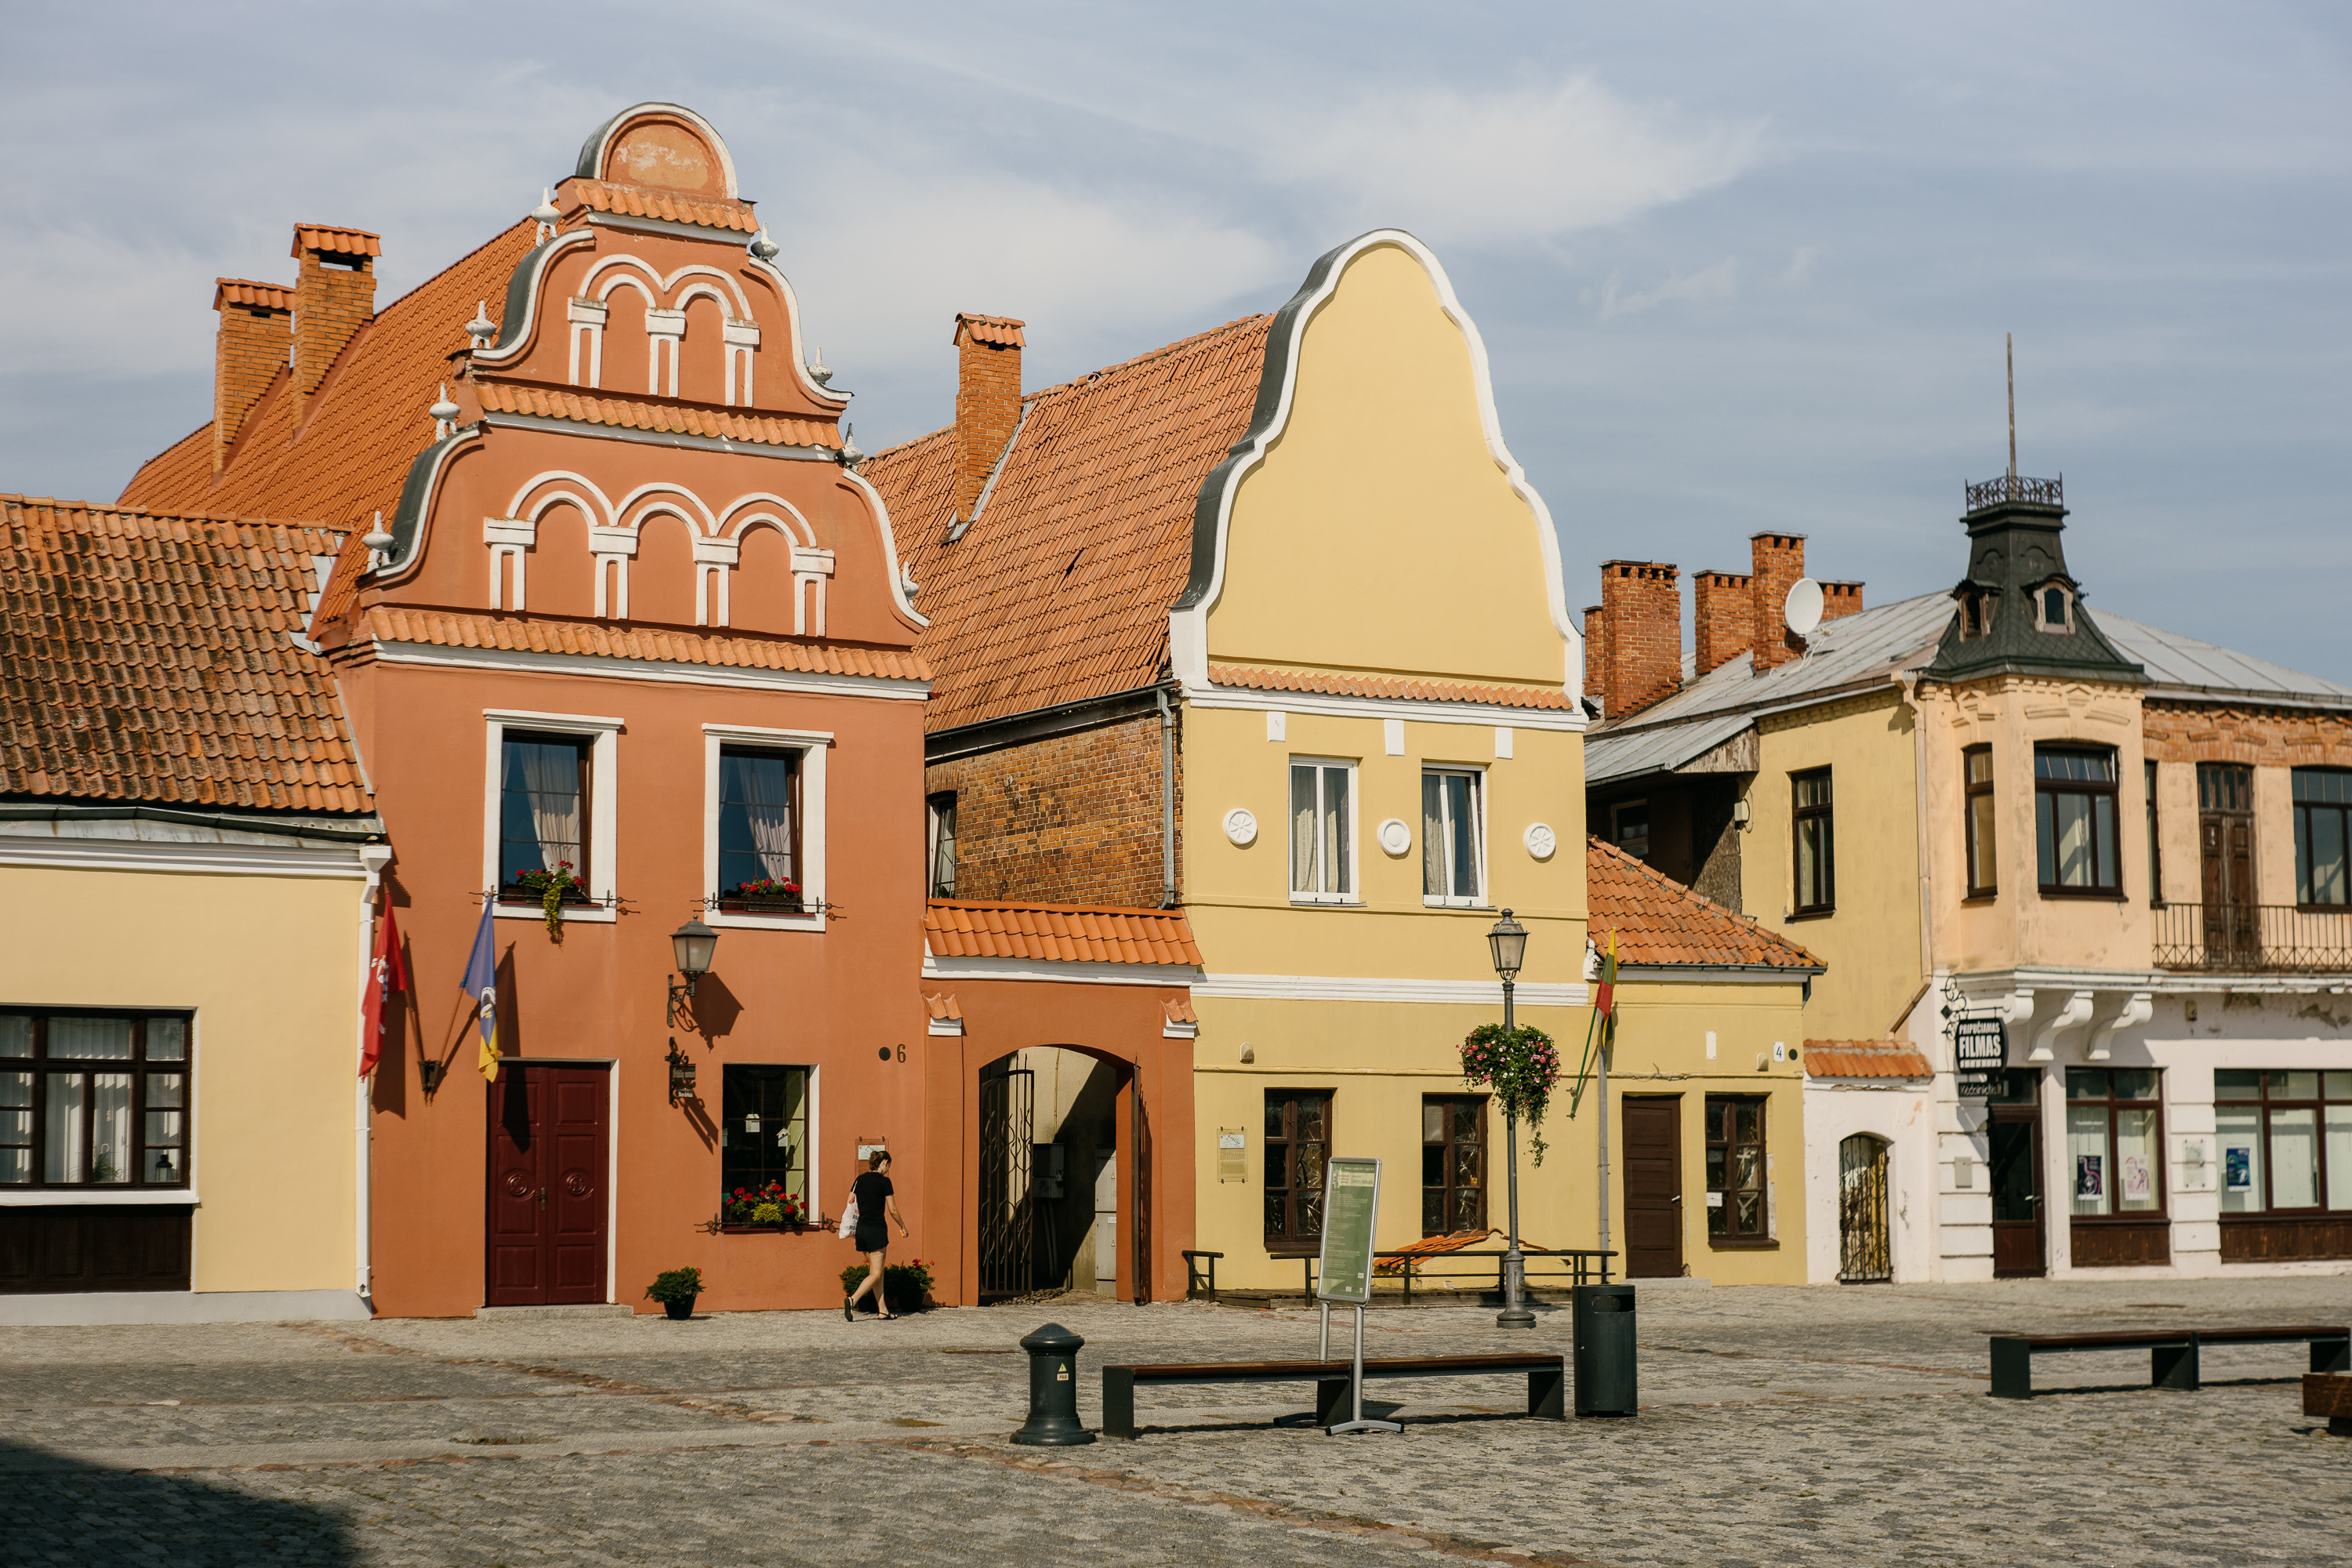 Kedainai old town square in Lithuania - taken with the Voigtlander Nokton 50mm f1.5 - Stopped down to f4